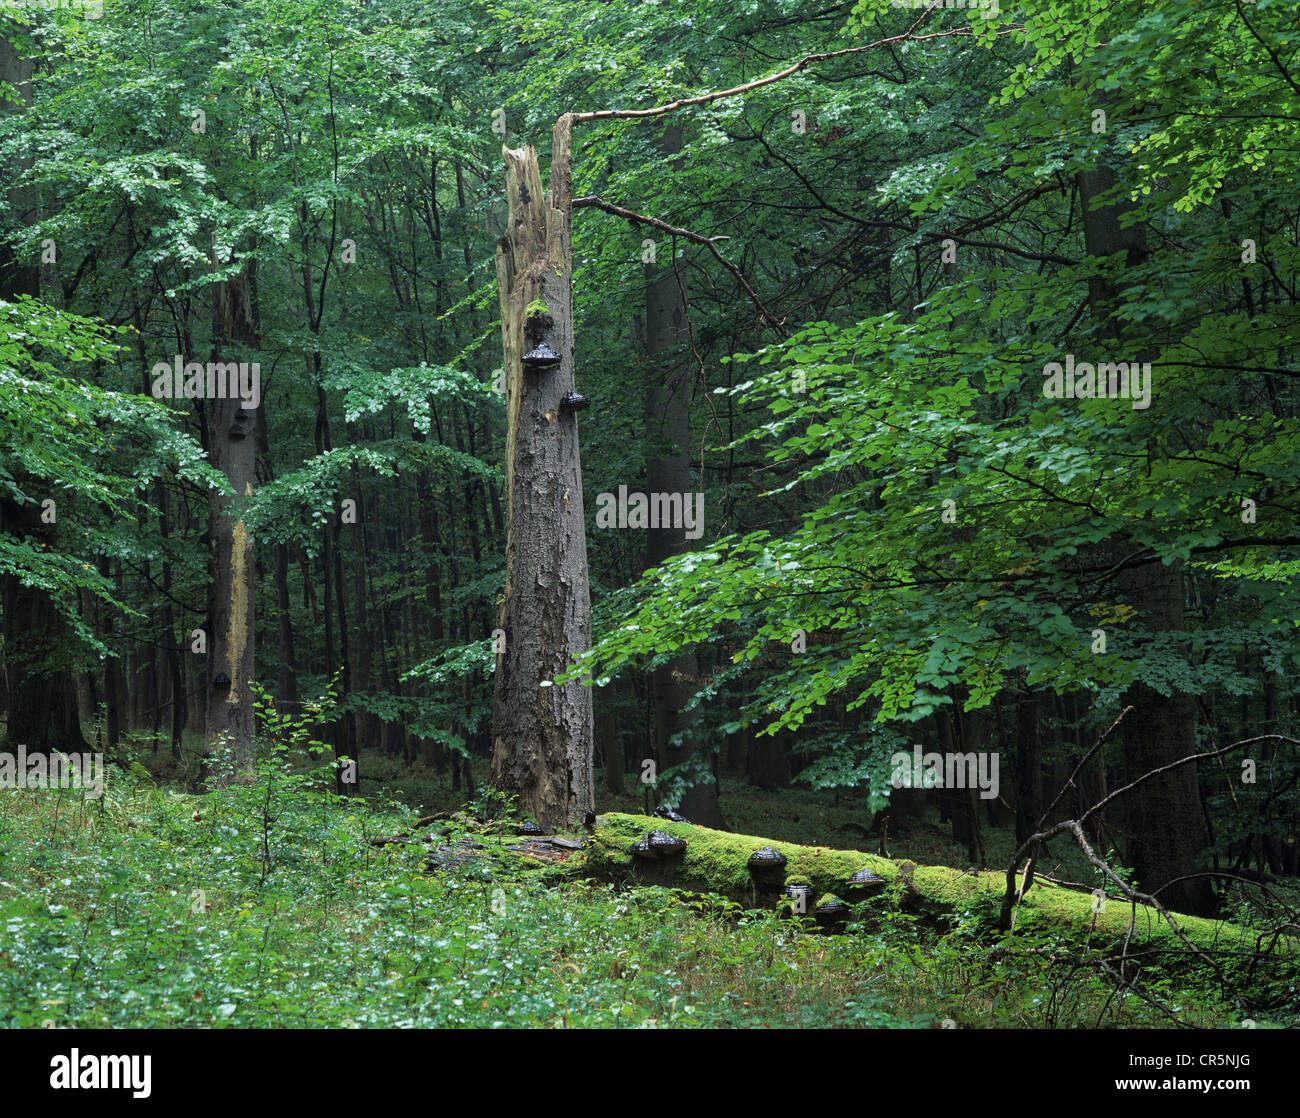 Beech forest (Fagus sylvatica) with deadwood on ground and standing, UNESCO World Natural Heritage Site, Hainich National Park Stock Photo